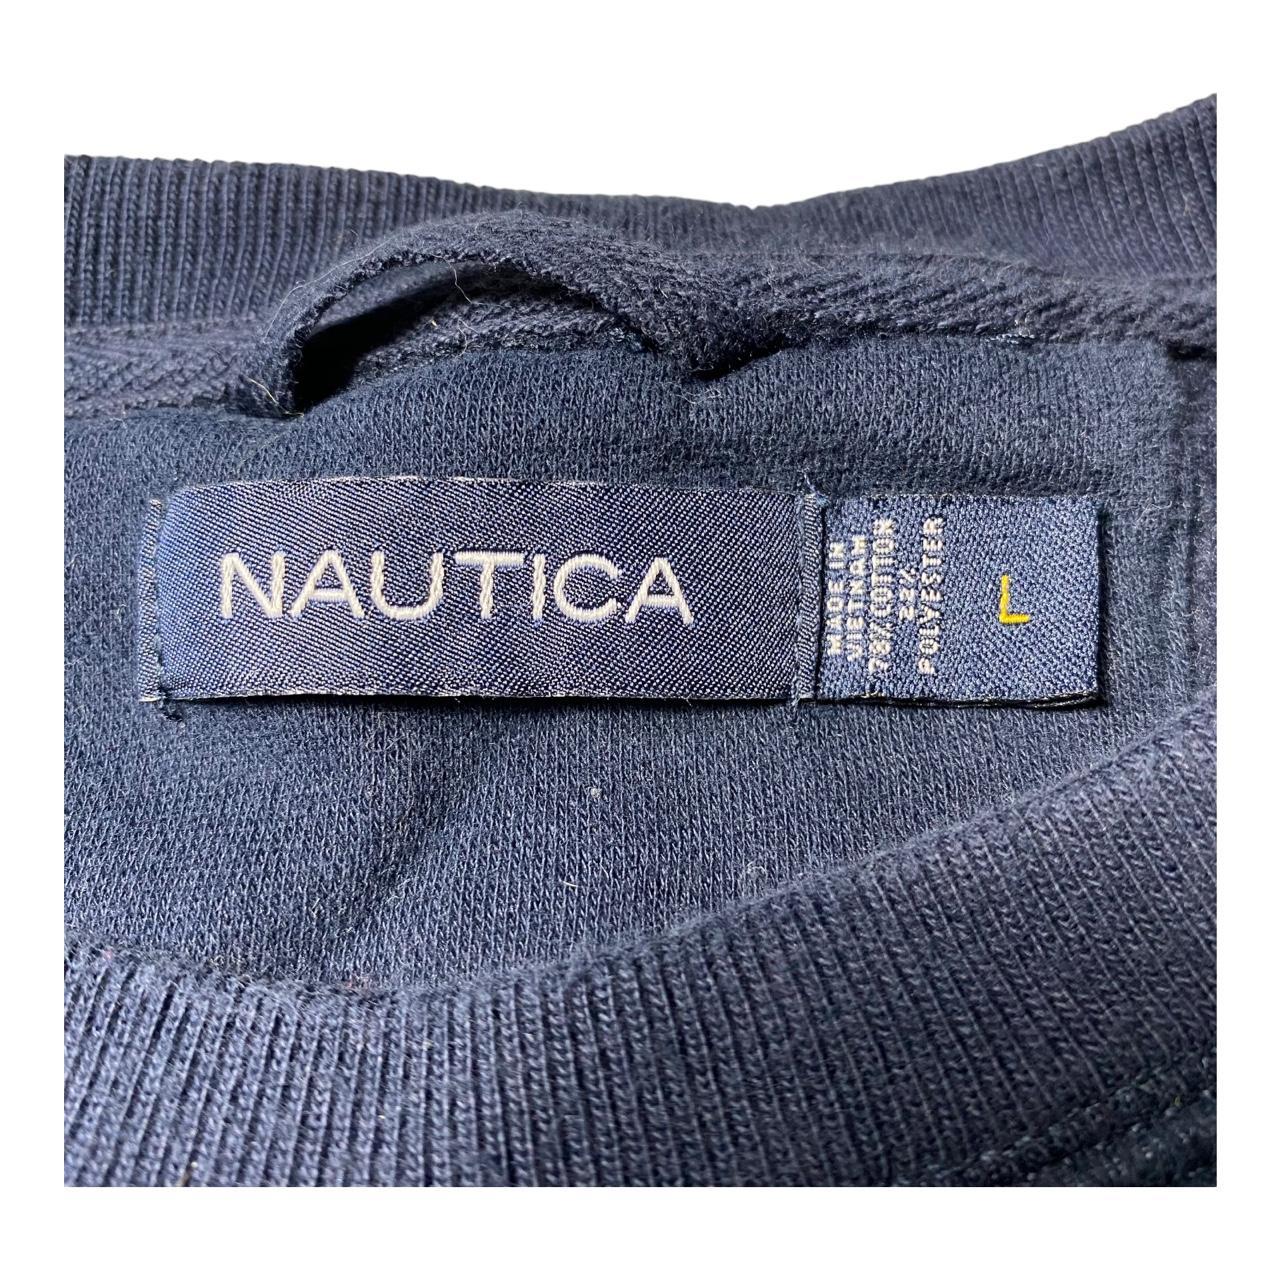 Vintage Navy and White nautica jumper Embroidered... - Depop